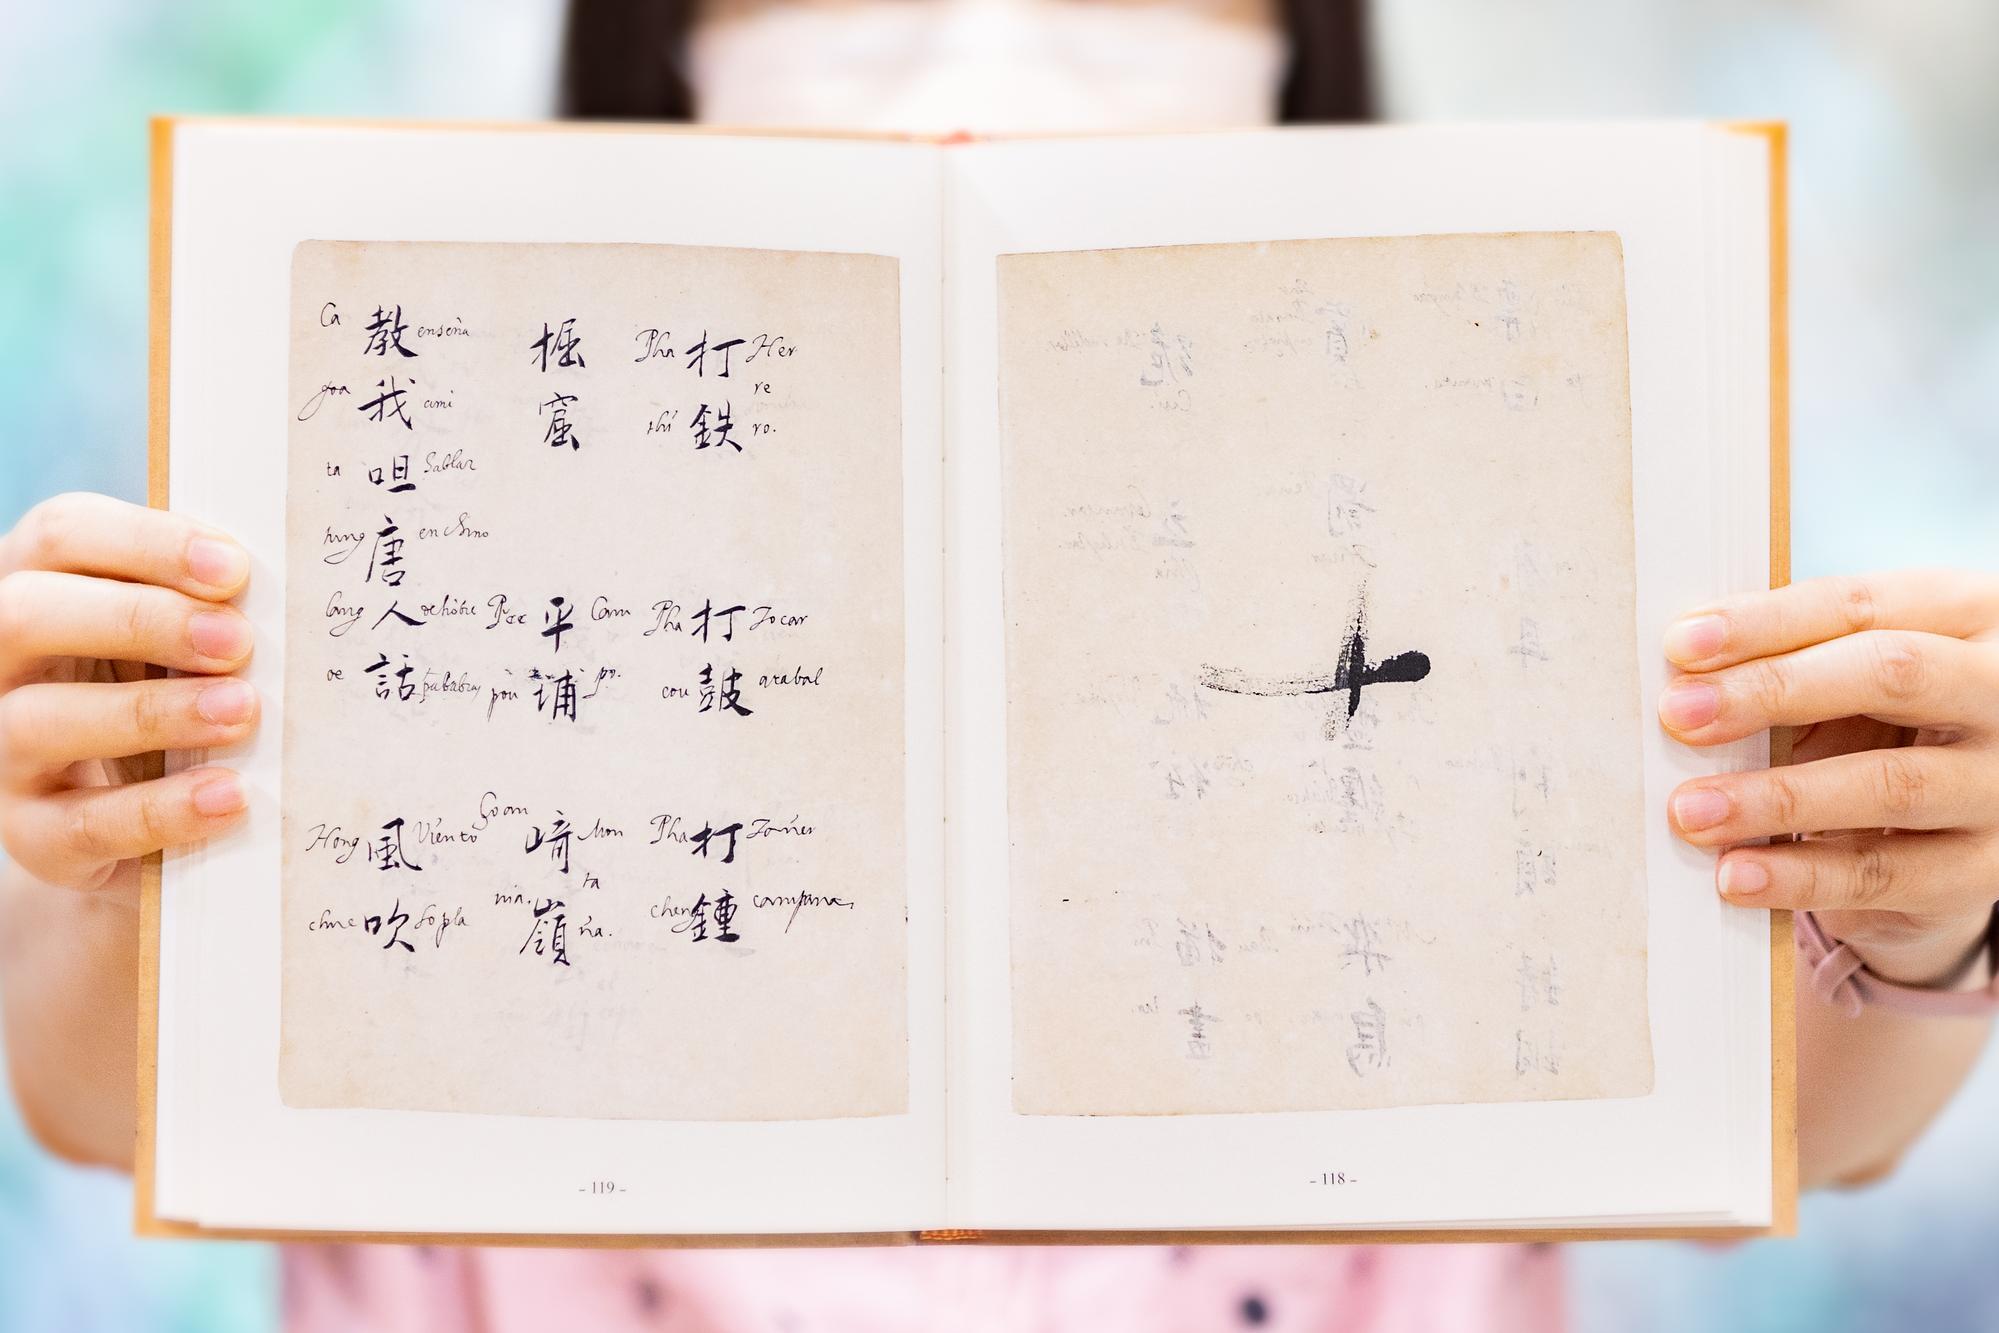 Over 400 hundred years ago, the Spanish people learning Chinese wrote down 